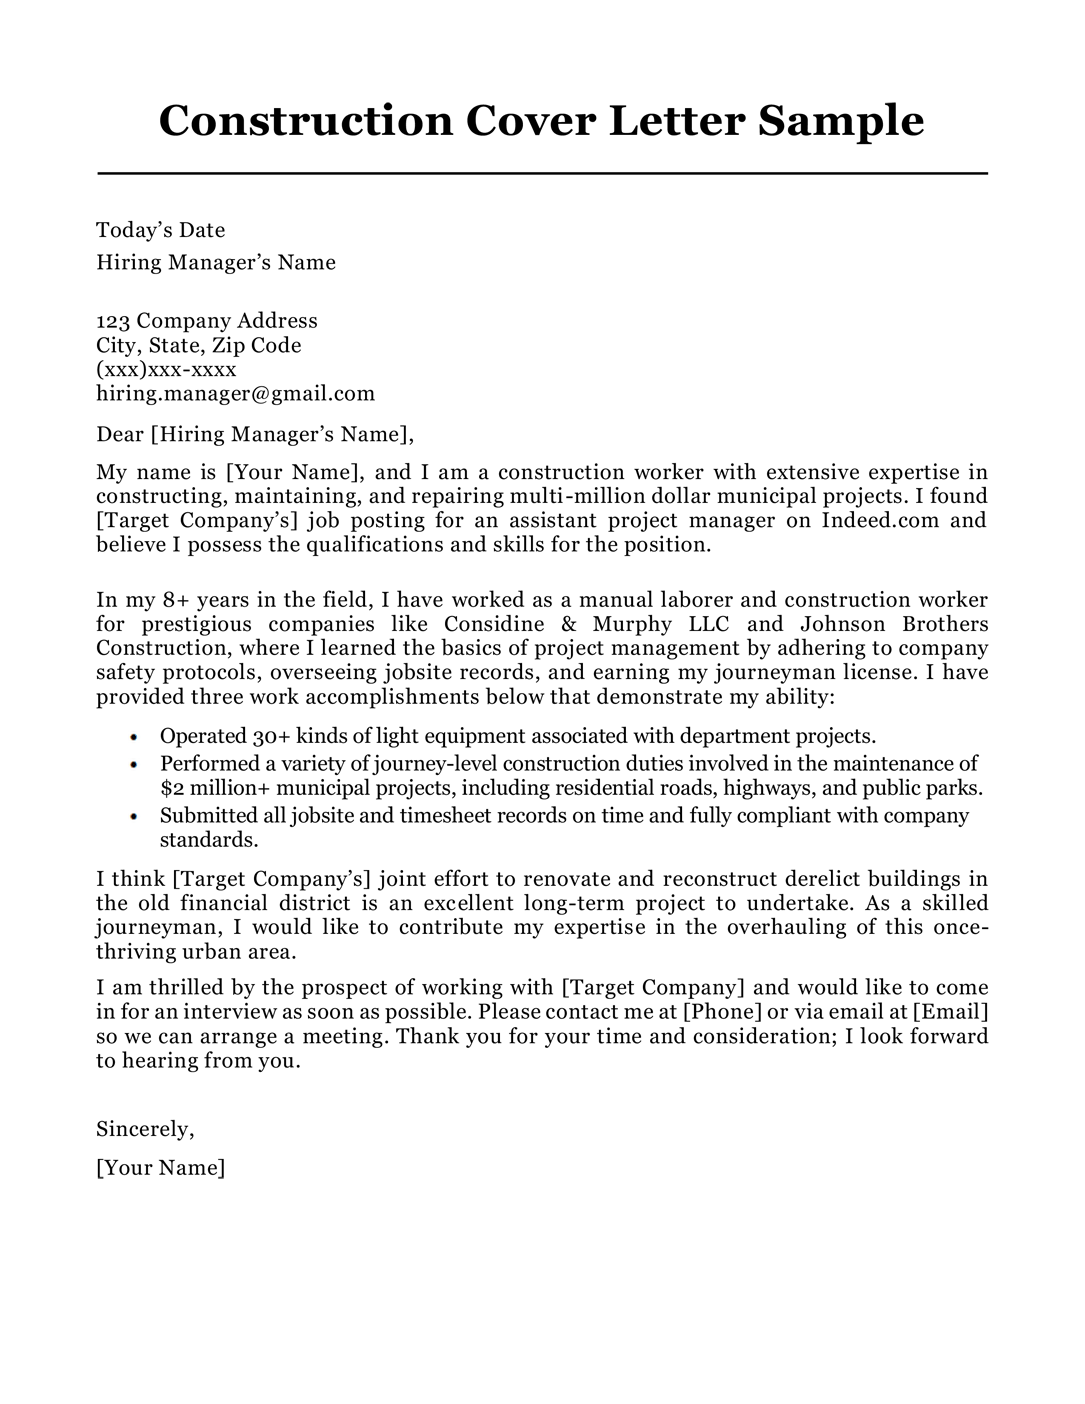 Construction cover letter sample